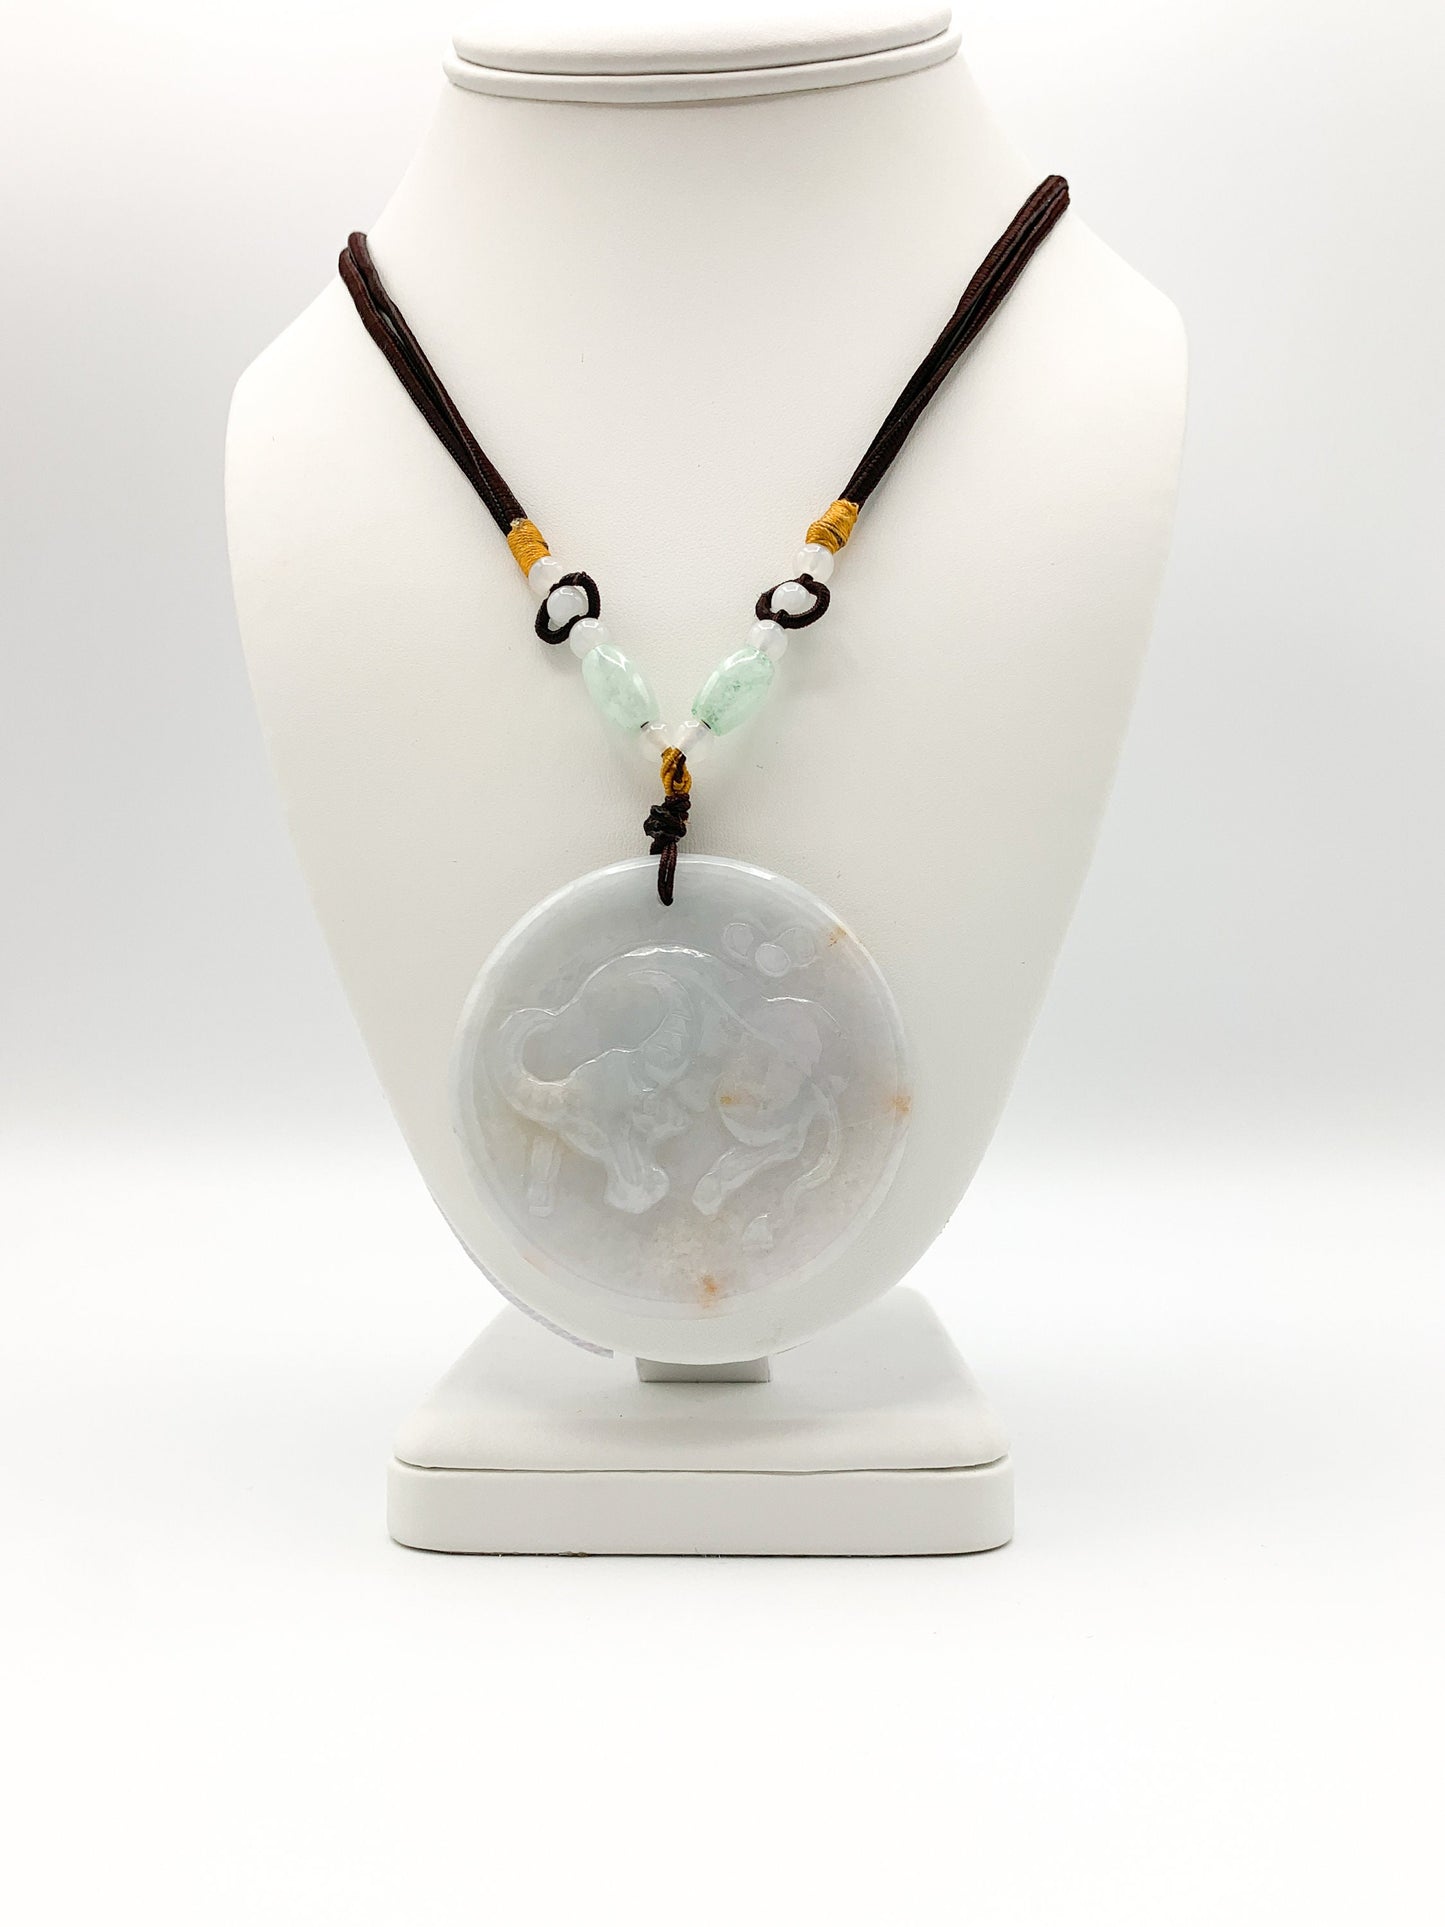 Large Ox Jadeite Jade Bull Cow Chinese Zodiac Carved Rustic Pendant Necklace, YJ-0321-0339704 - AriaDesignCollection